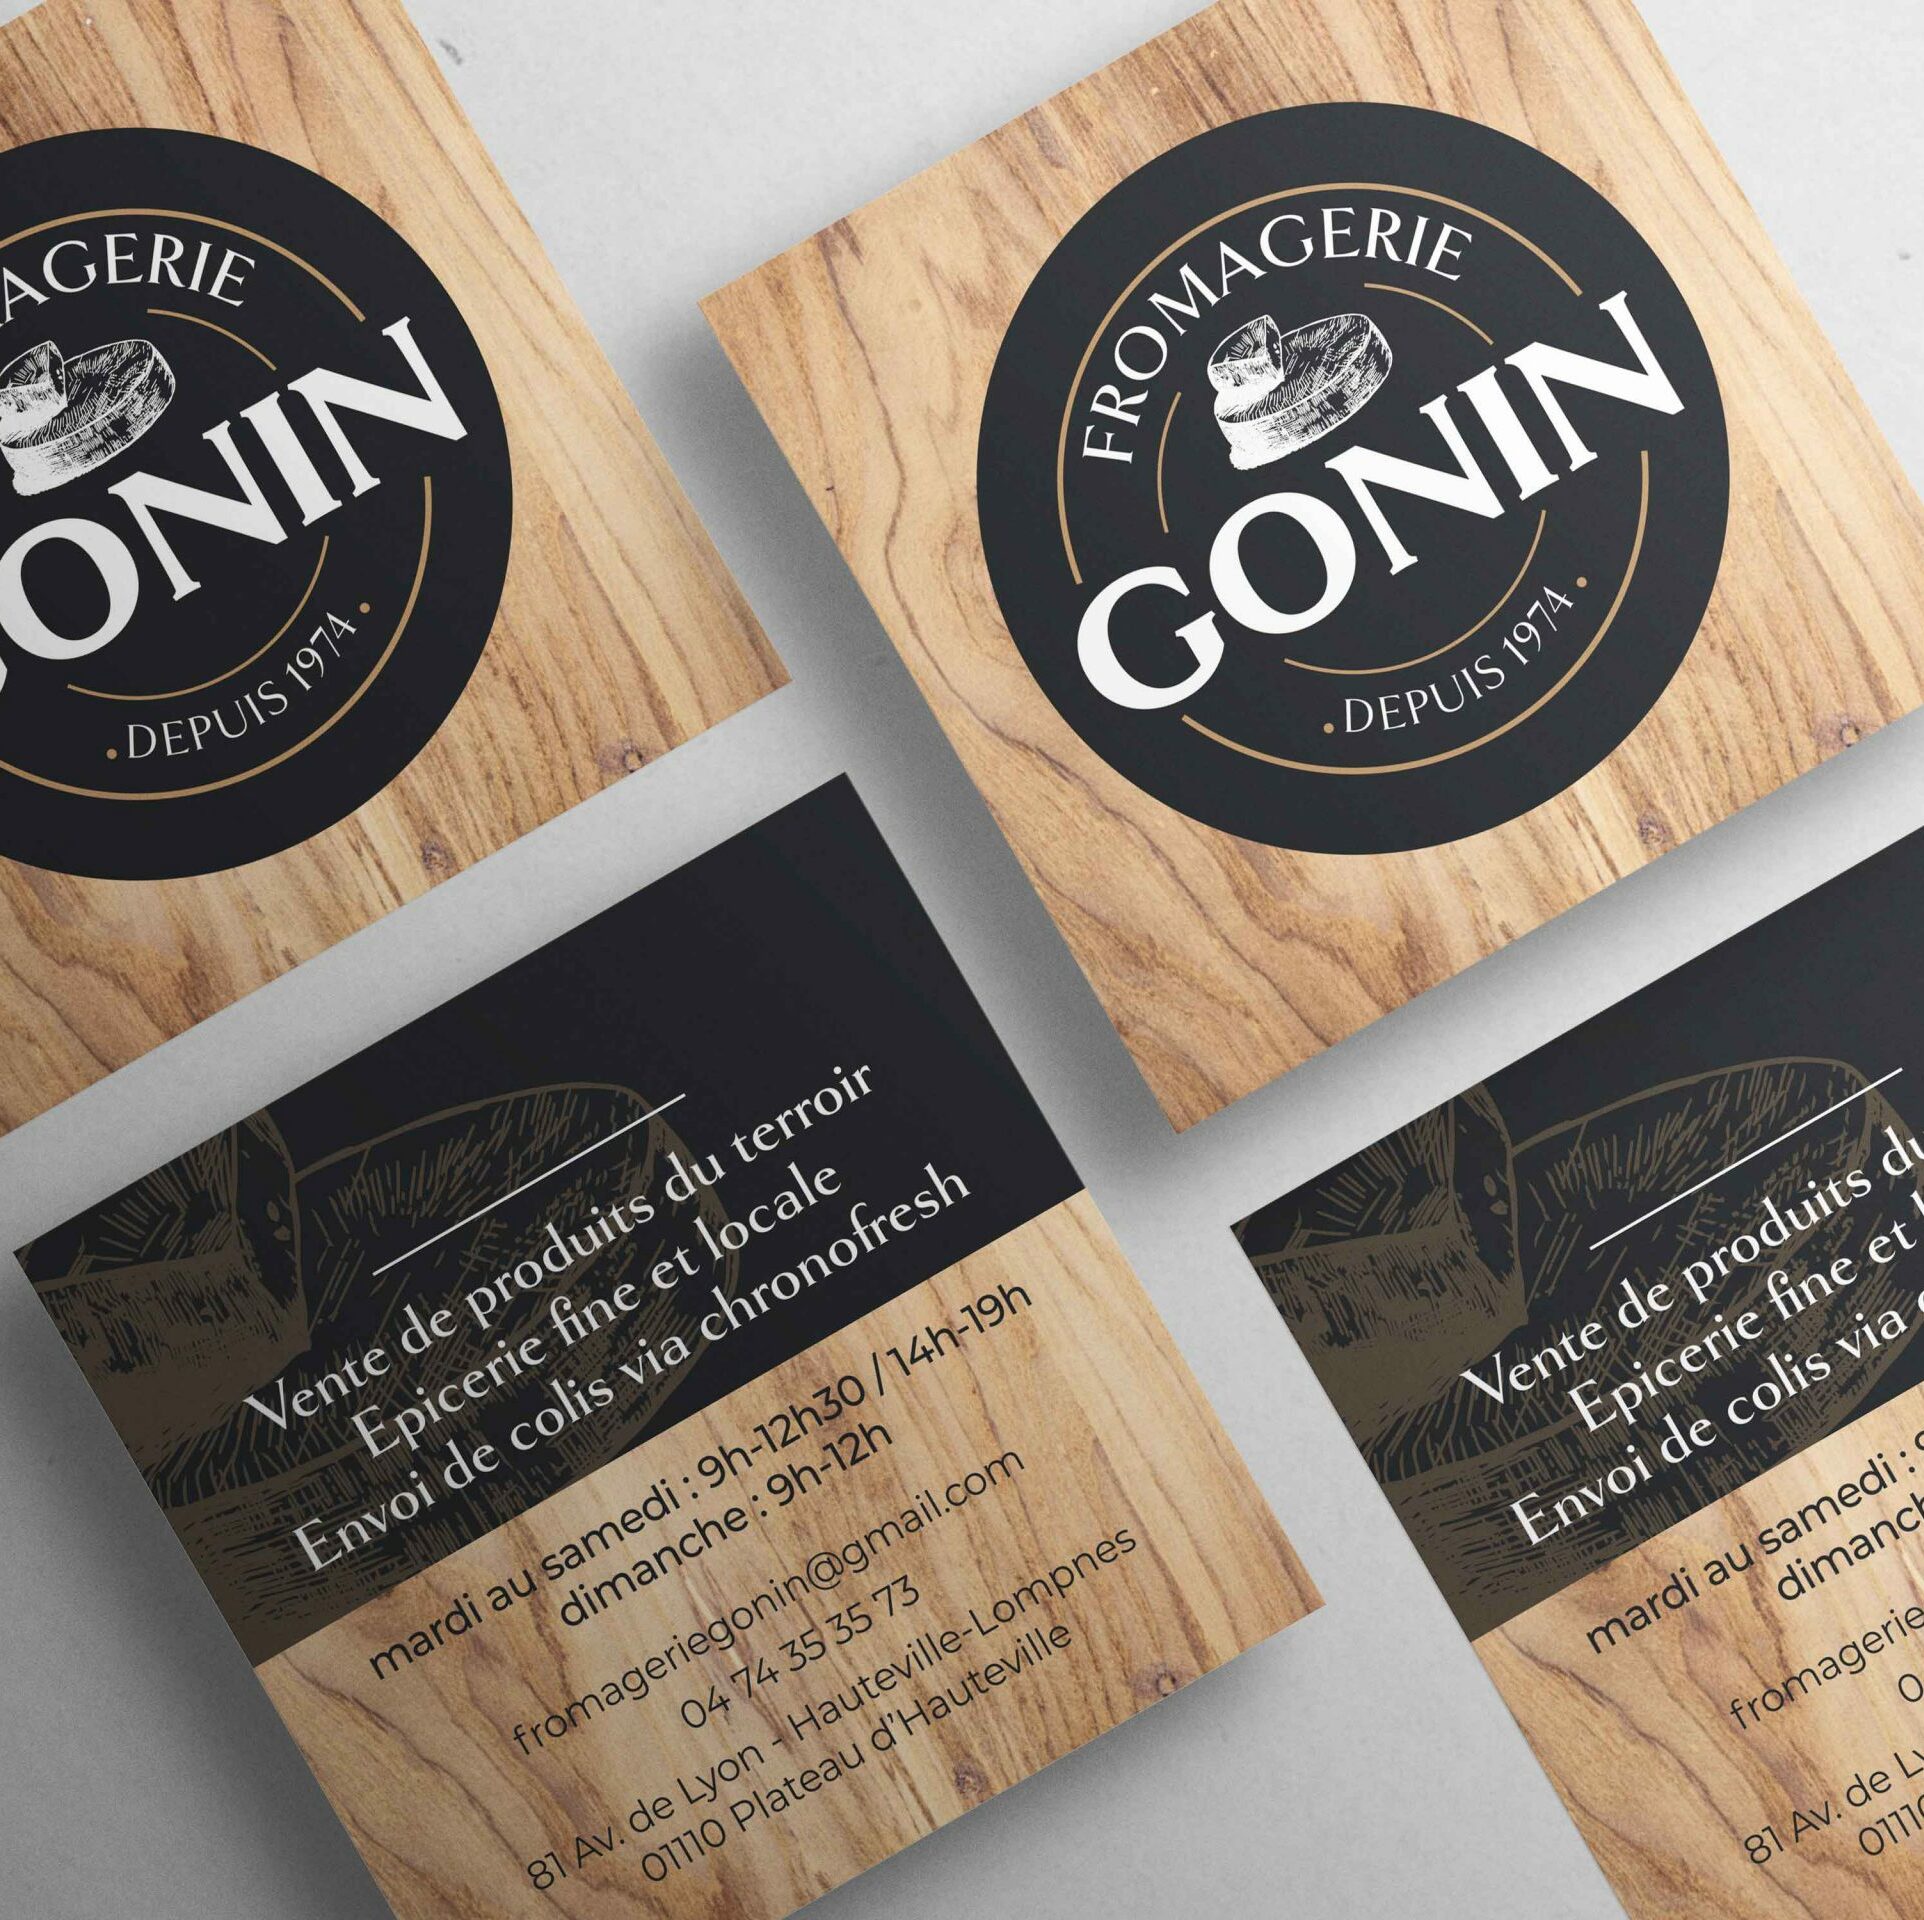 fromagerie gonin